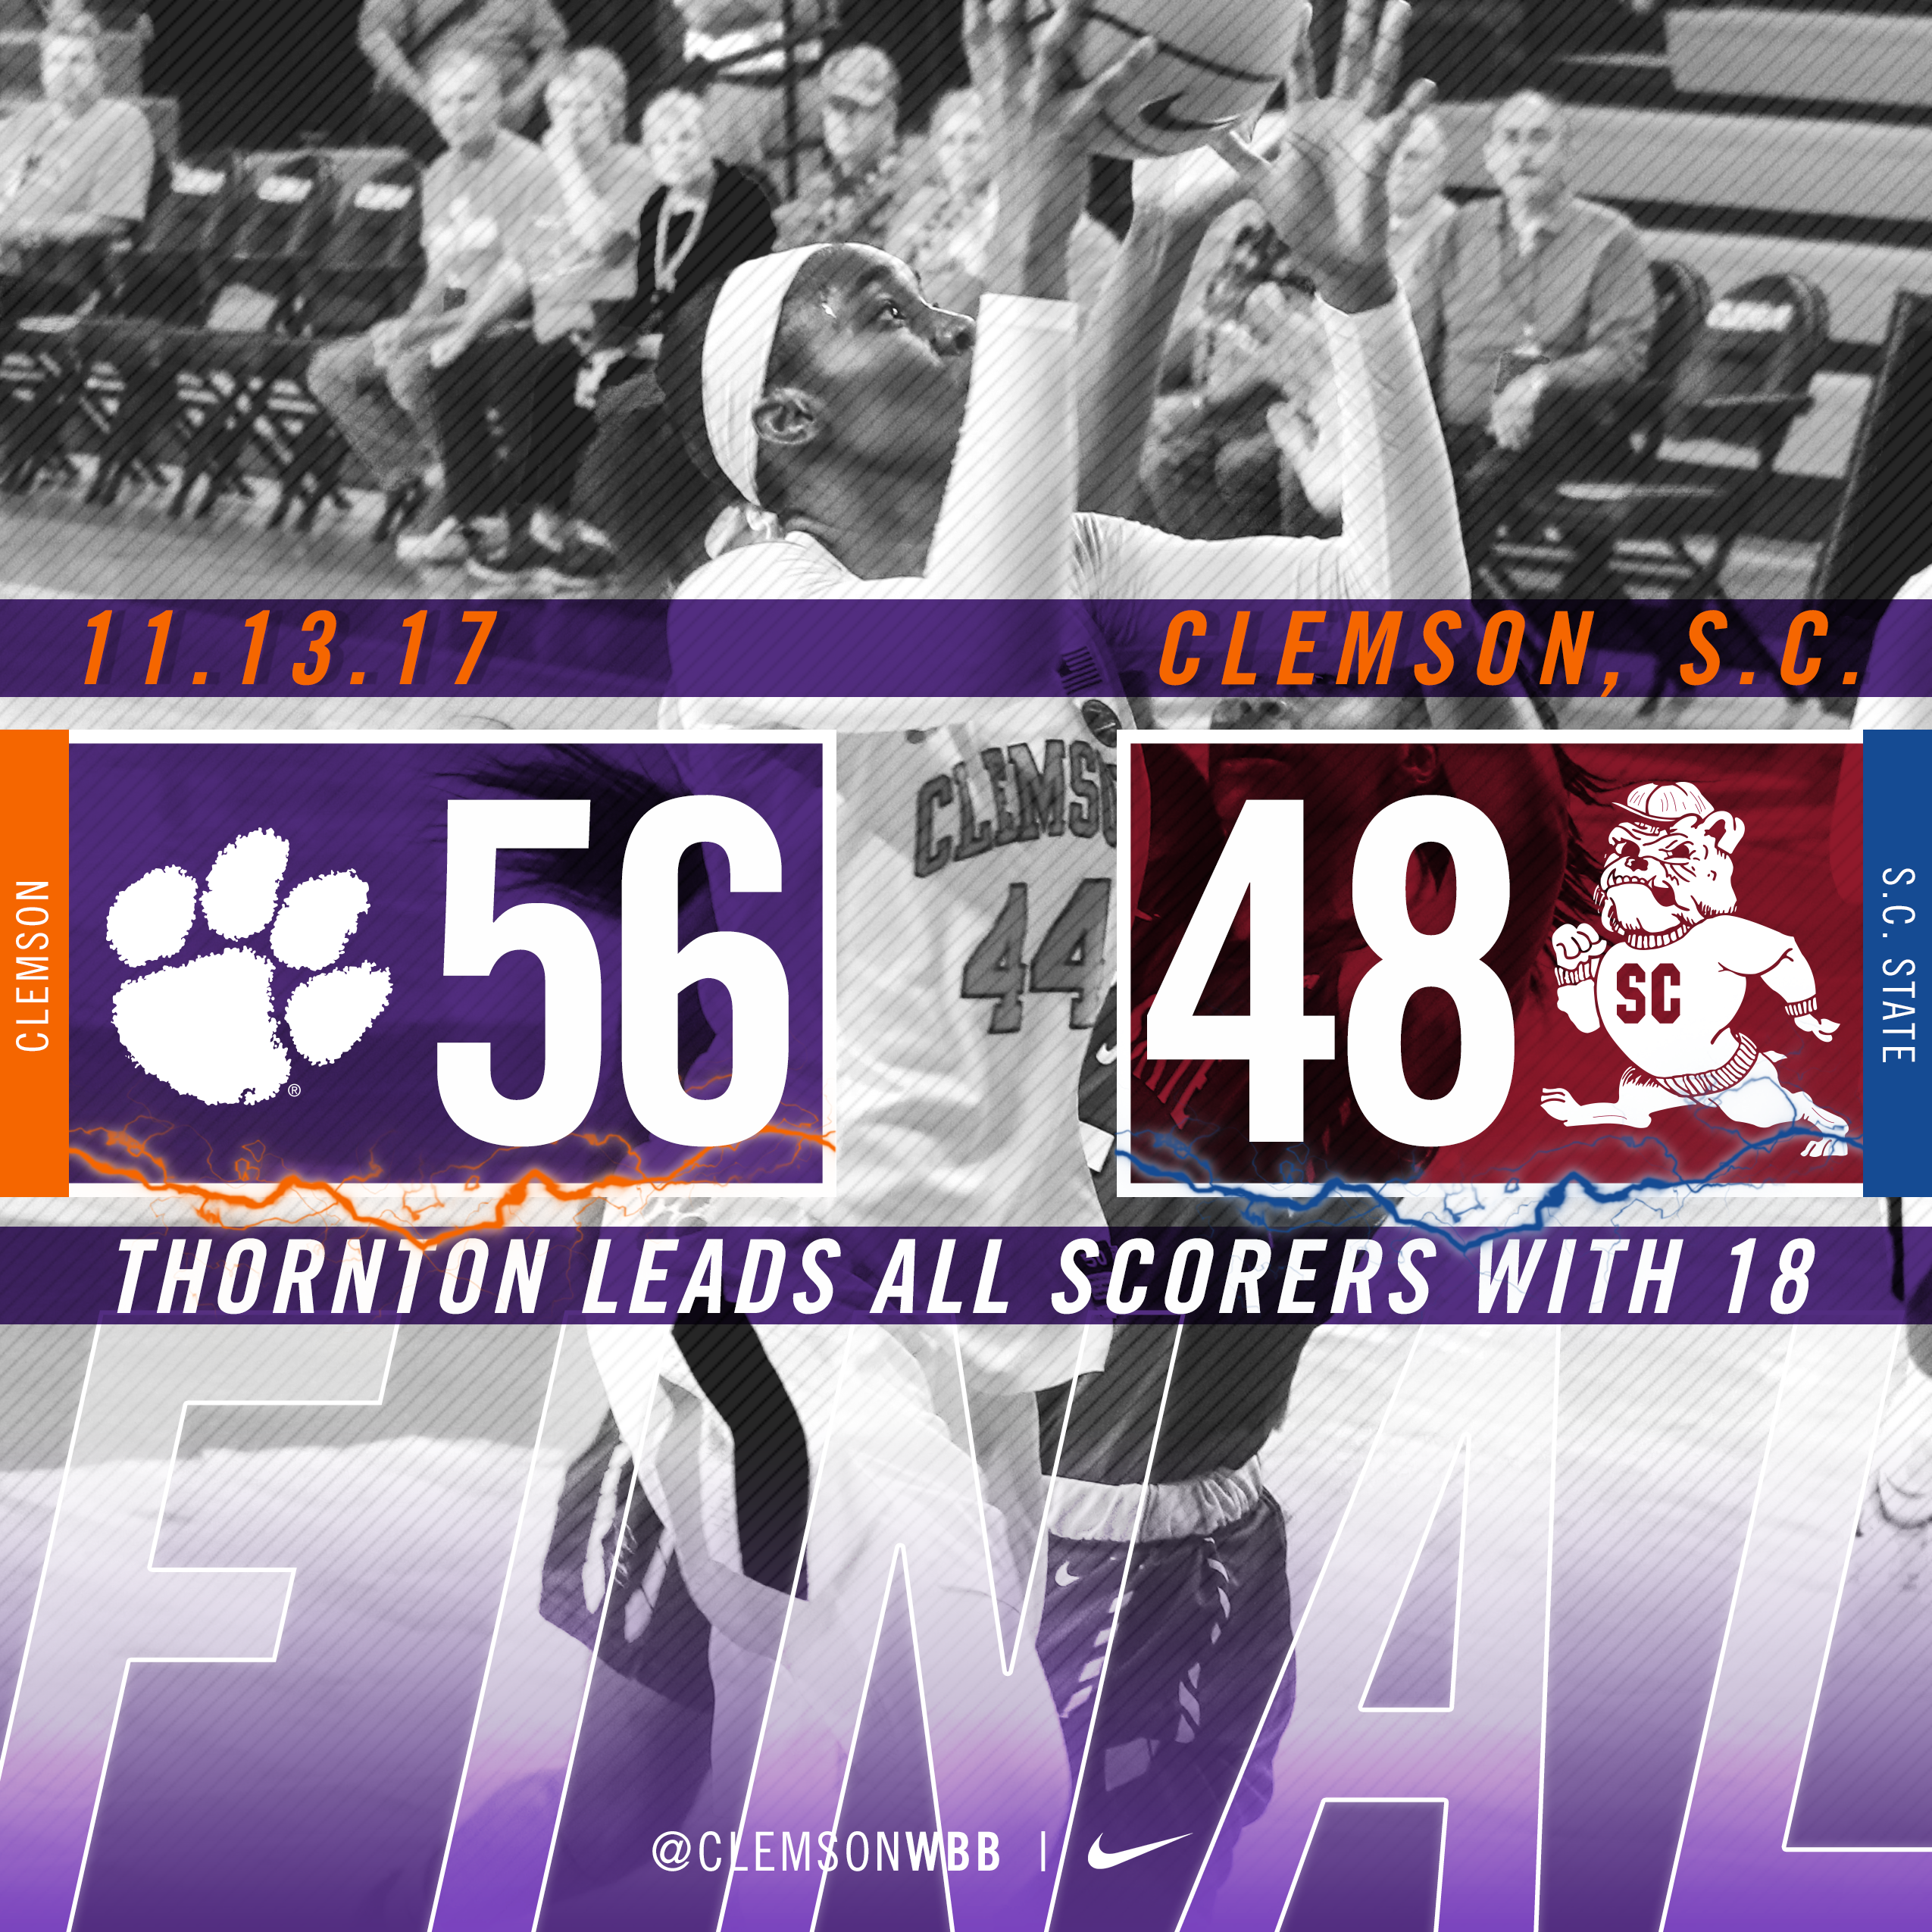 Thornton & Edwards Fuel Clemson's Win over S.C. State Monday